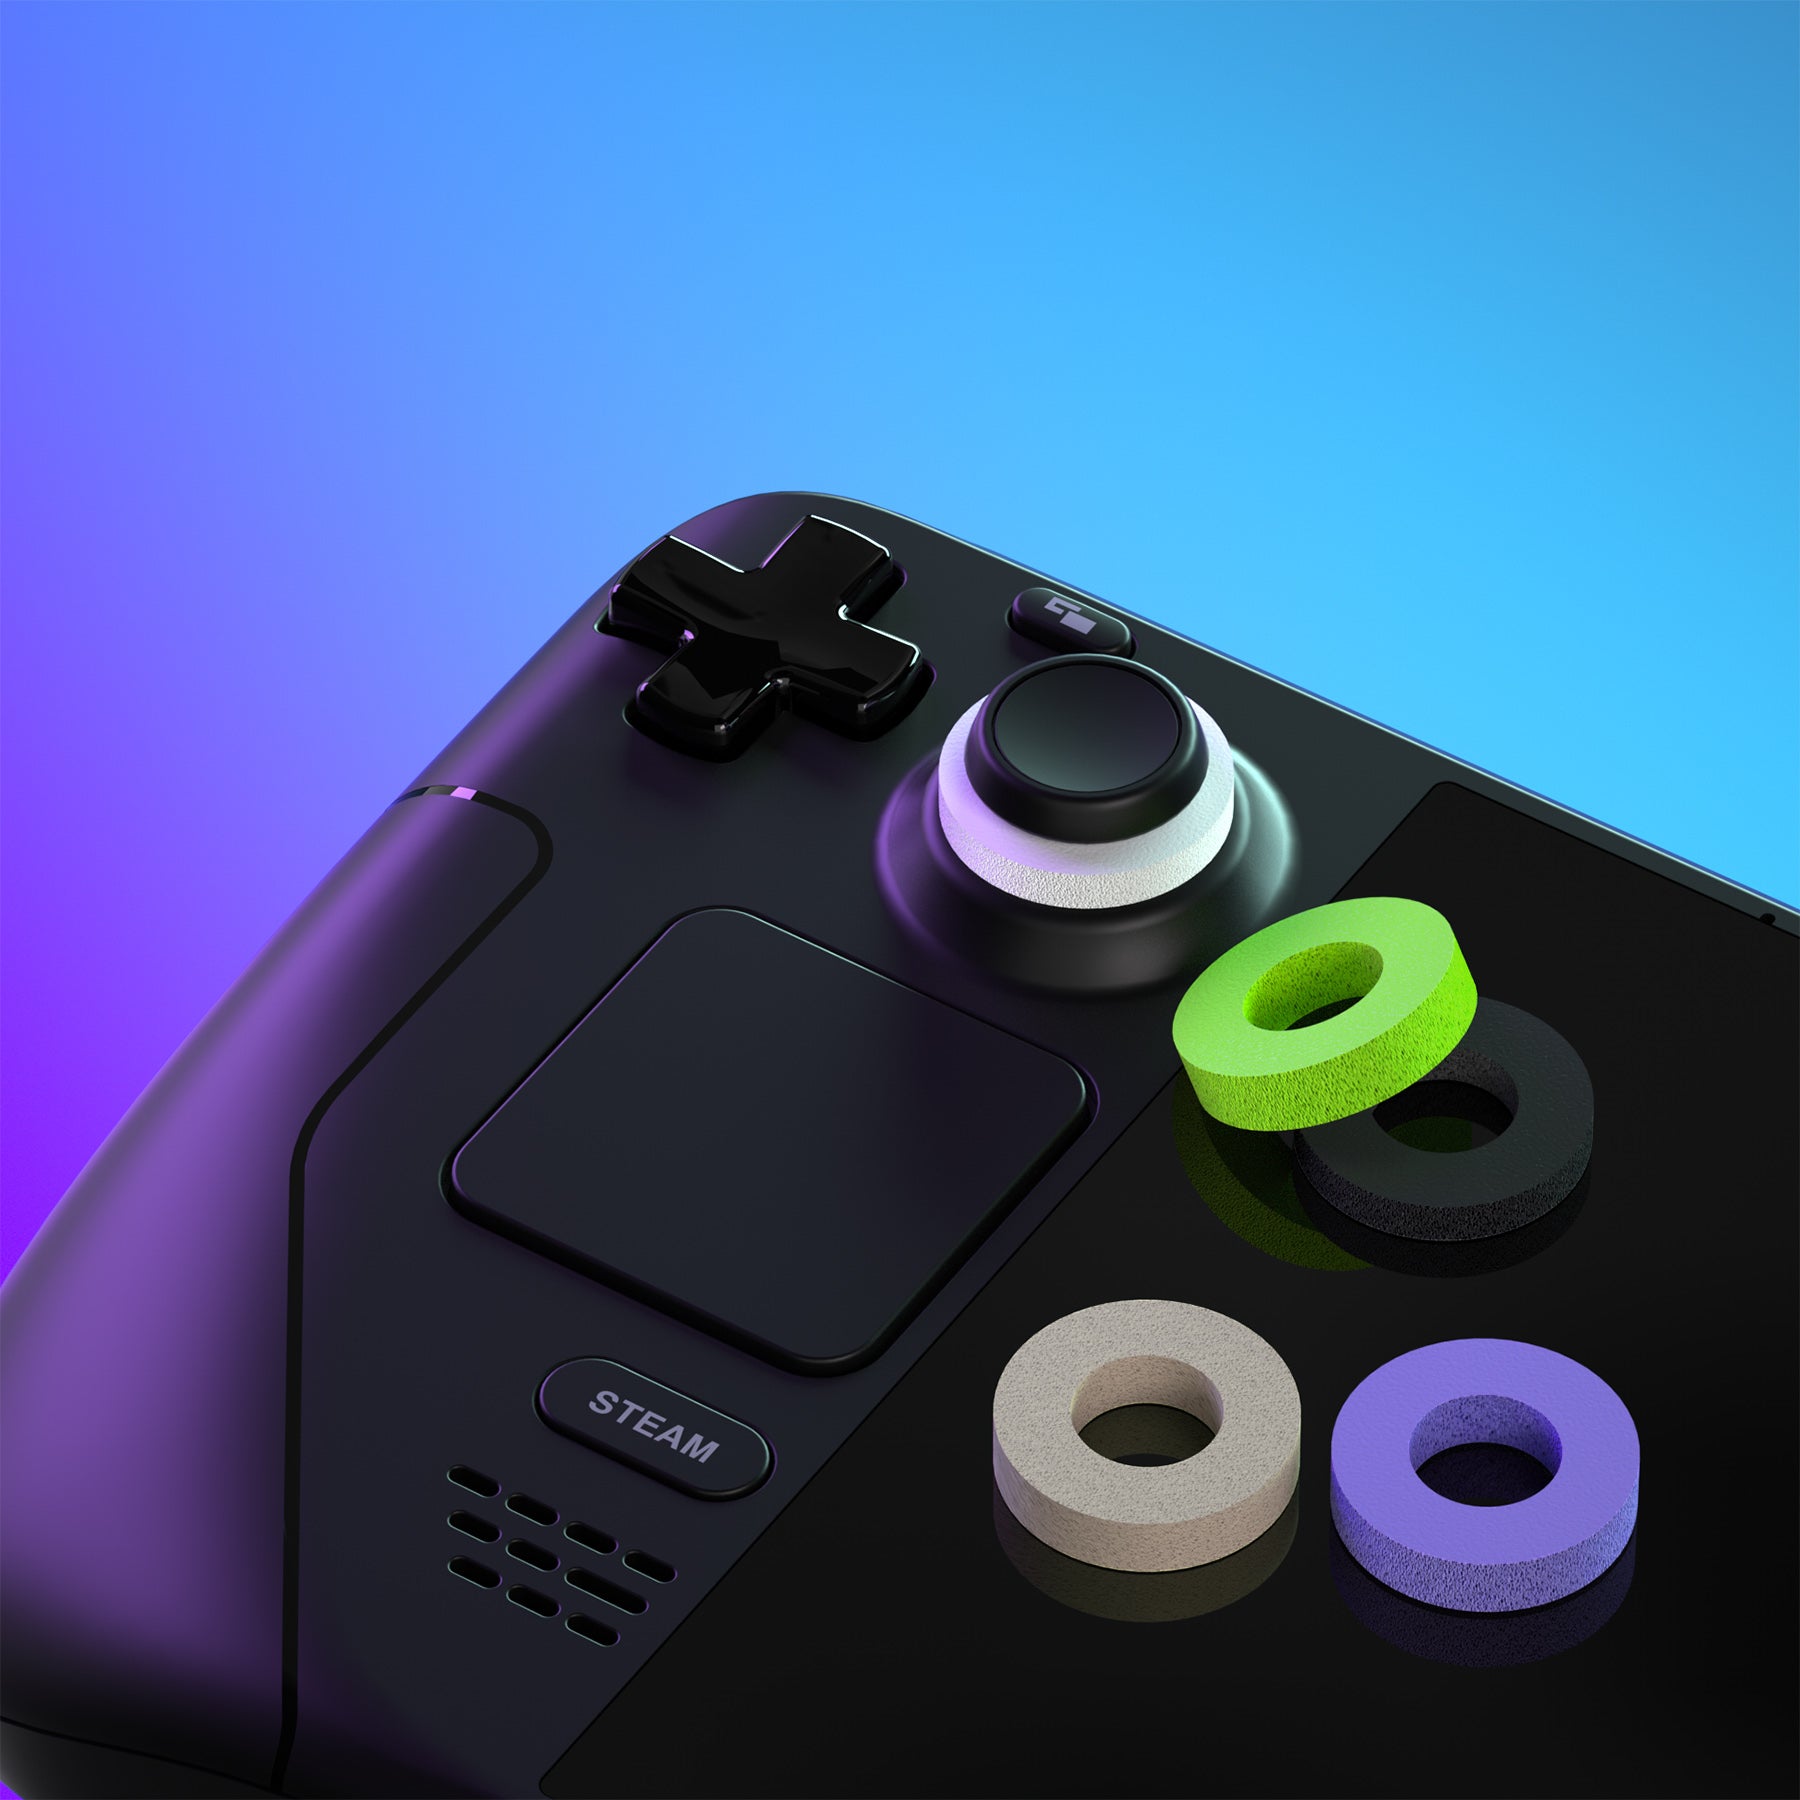 PlayVital 5 Pairs Aim Assist Target Motion Control Precision Rings for ps5, for ps4, for Xbox Series X/S, Xbox One, Xbox 360, for Switch Pro Controller, for Steam Deck - Green Purple Gray Black White - PFPJ117 PlayVital